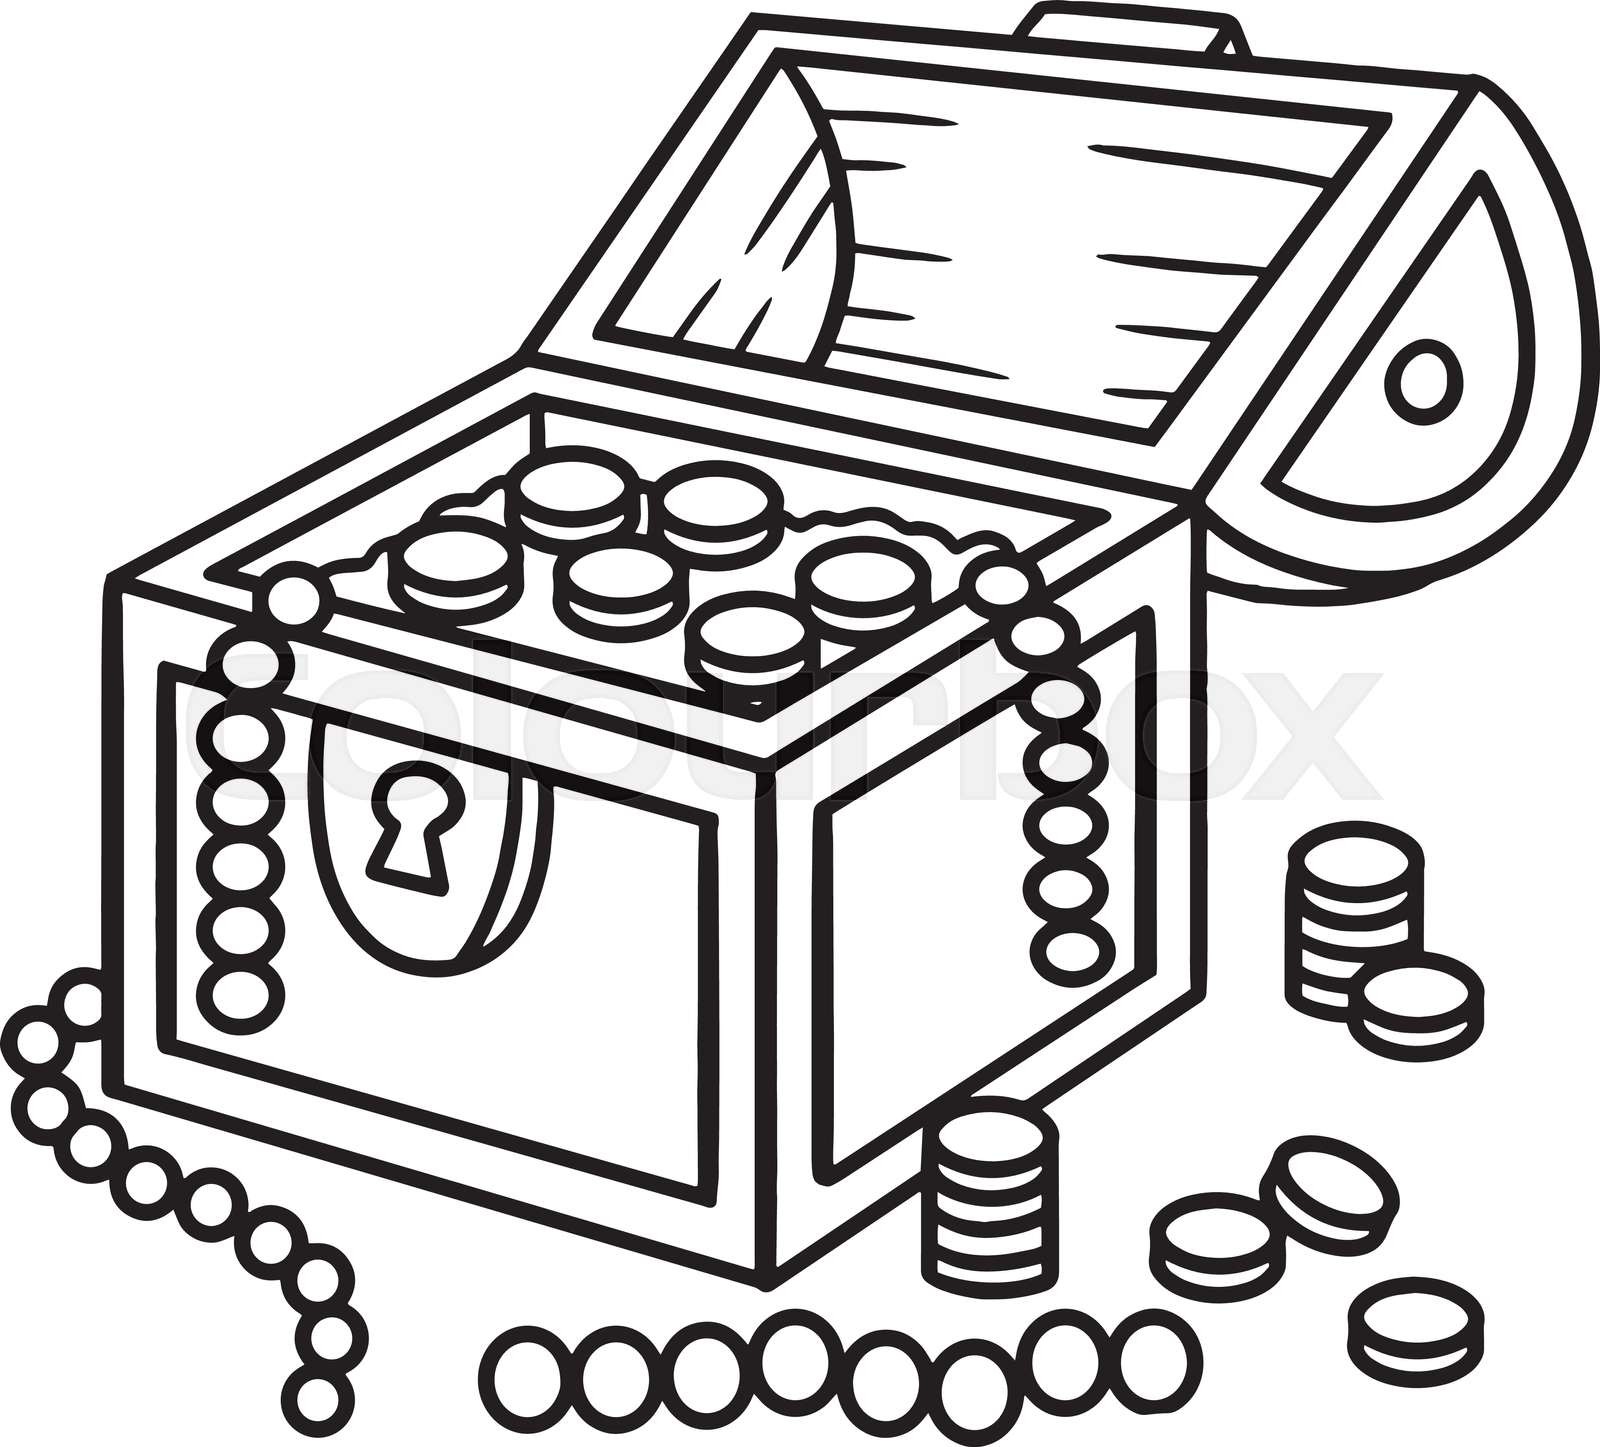 Mermaids treasure box isolated coloring page stock vector